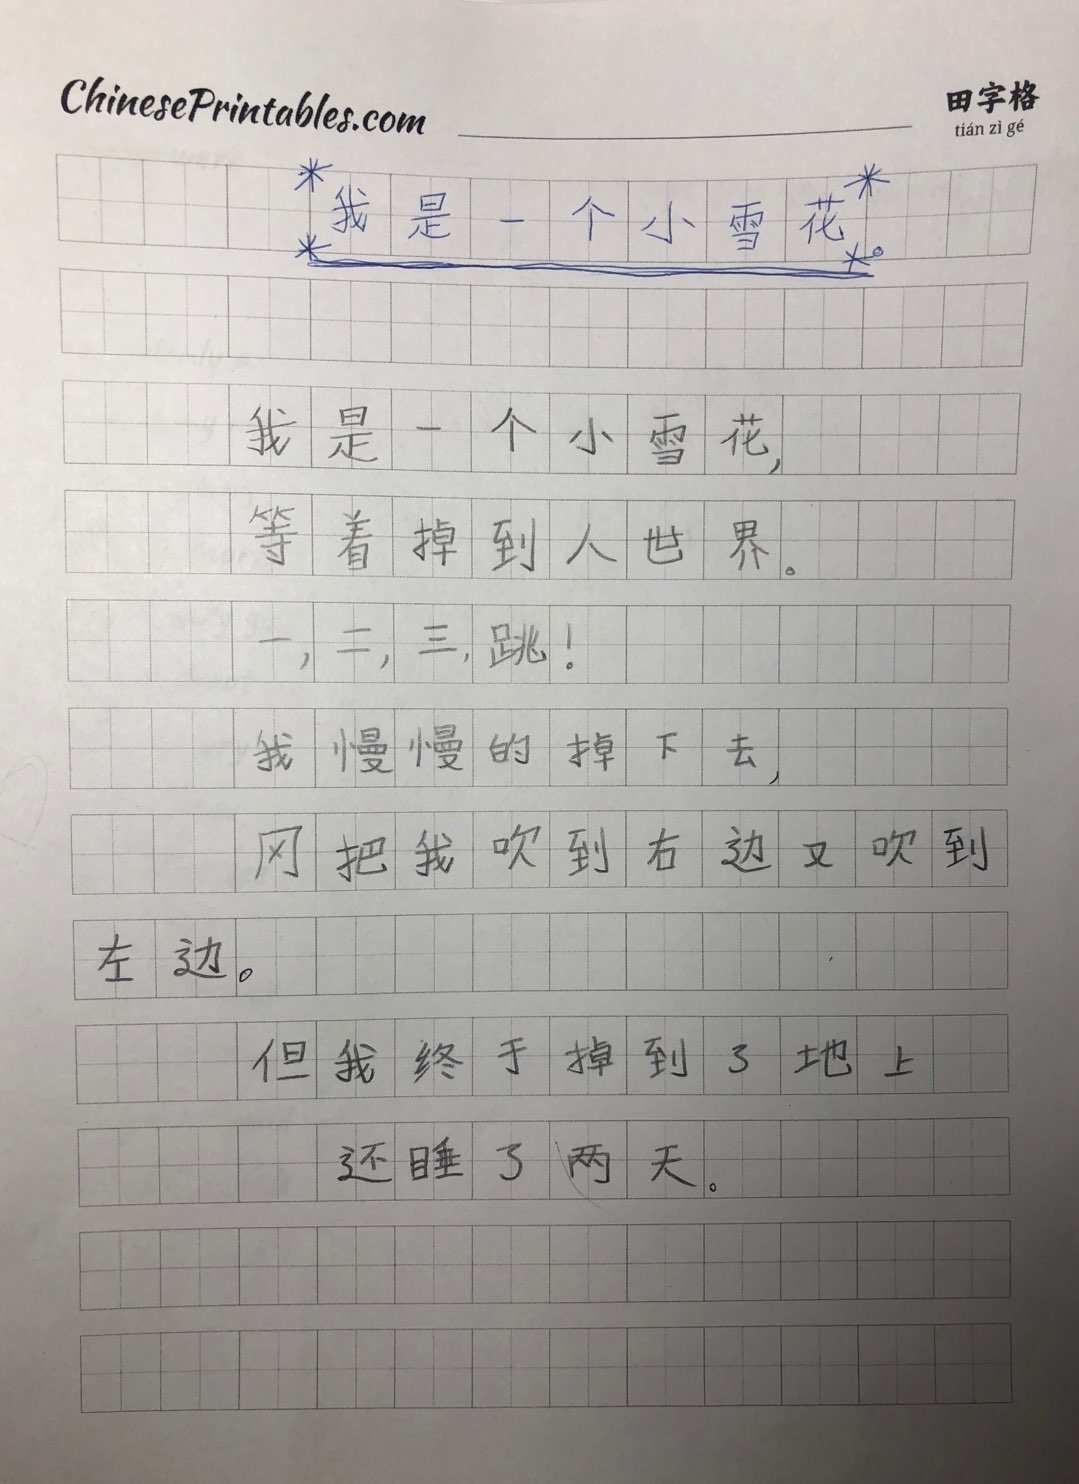 6/1/2018--Chinese Poem About Snow (10 years old)